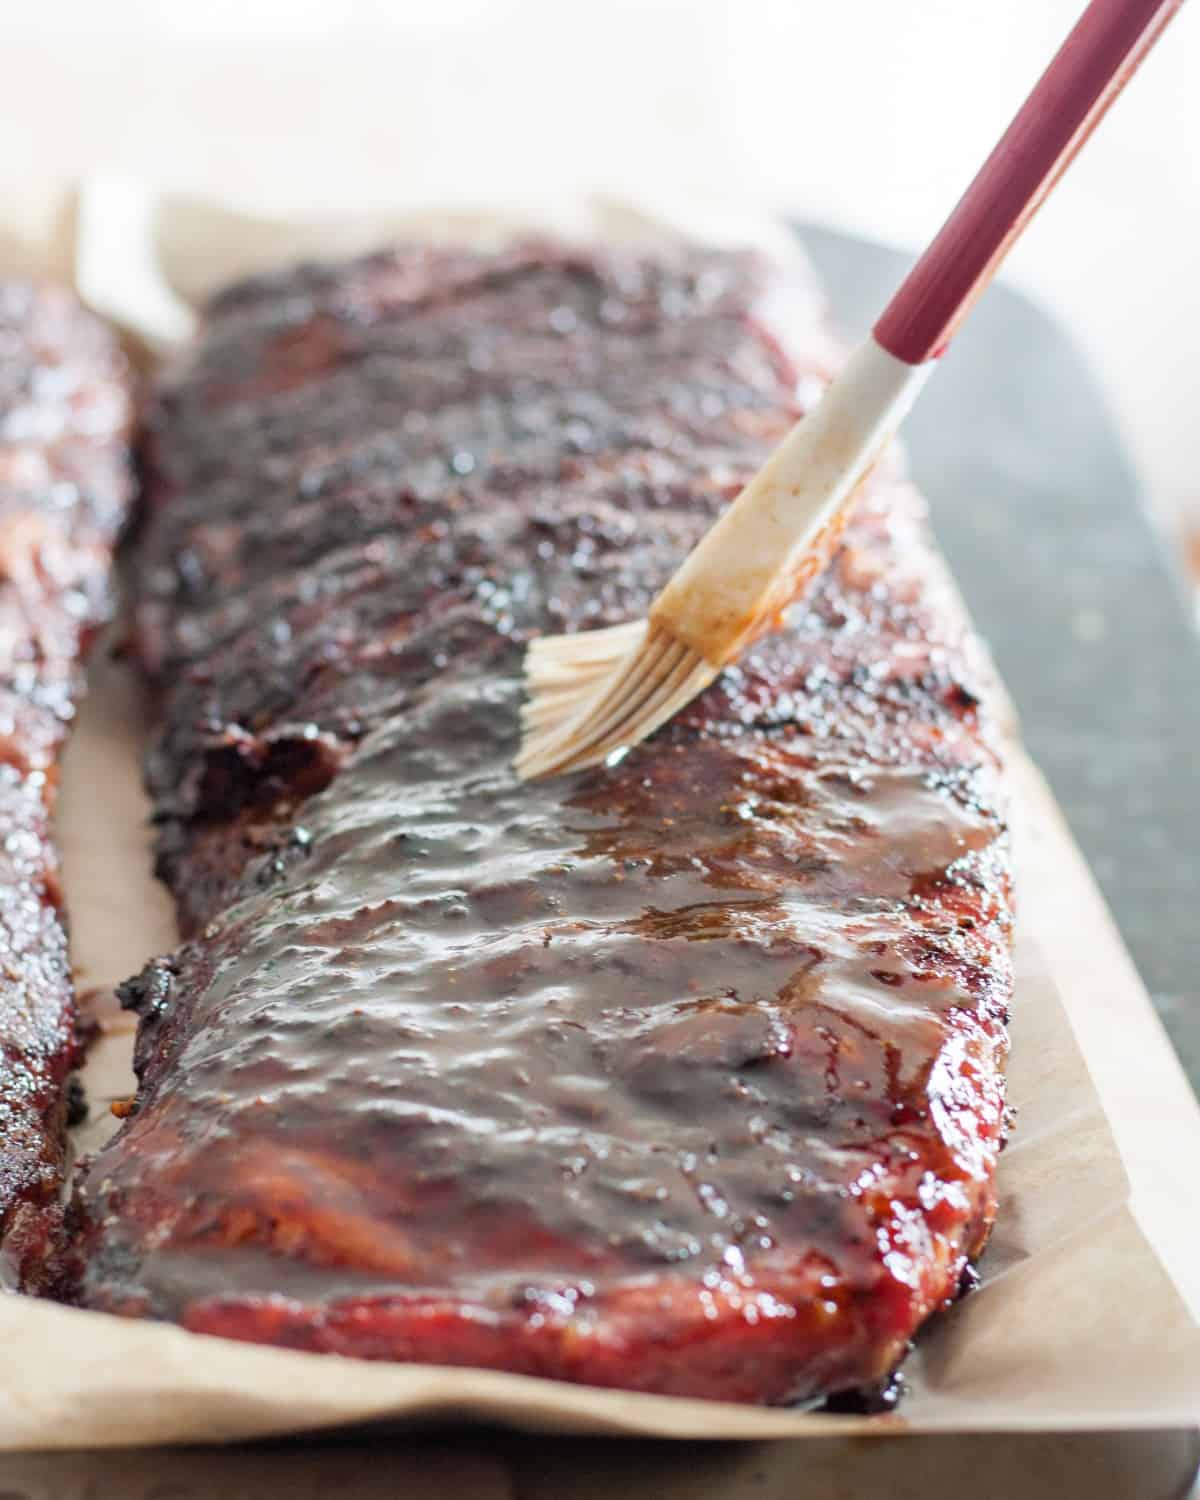 Sticky, saucy, sweet and spicy, these Hawaiian-inspired root beer sticky ribs are a crowd pleaser! * Recipe on GoodieGodmother.com